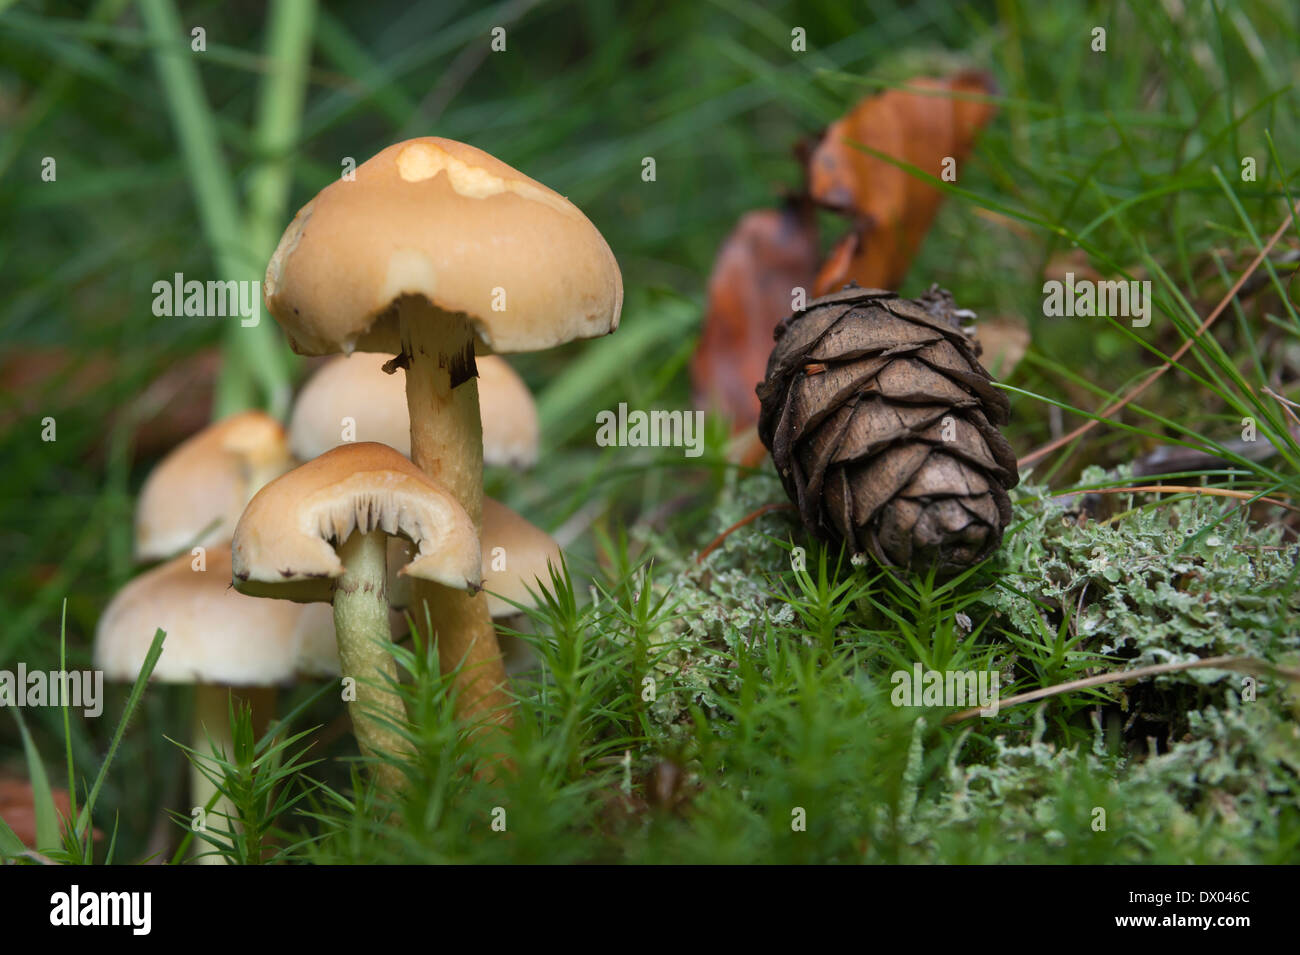 Autumnal scene on the forest floor. Mushrooms and pine cone on a bed of moss and lichen Stock Photo